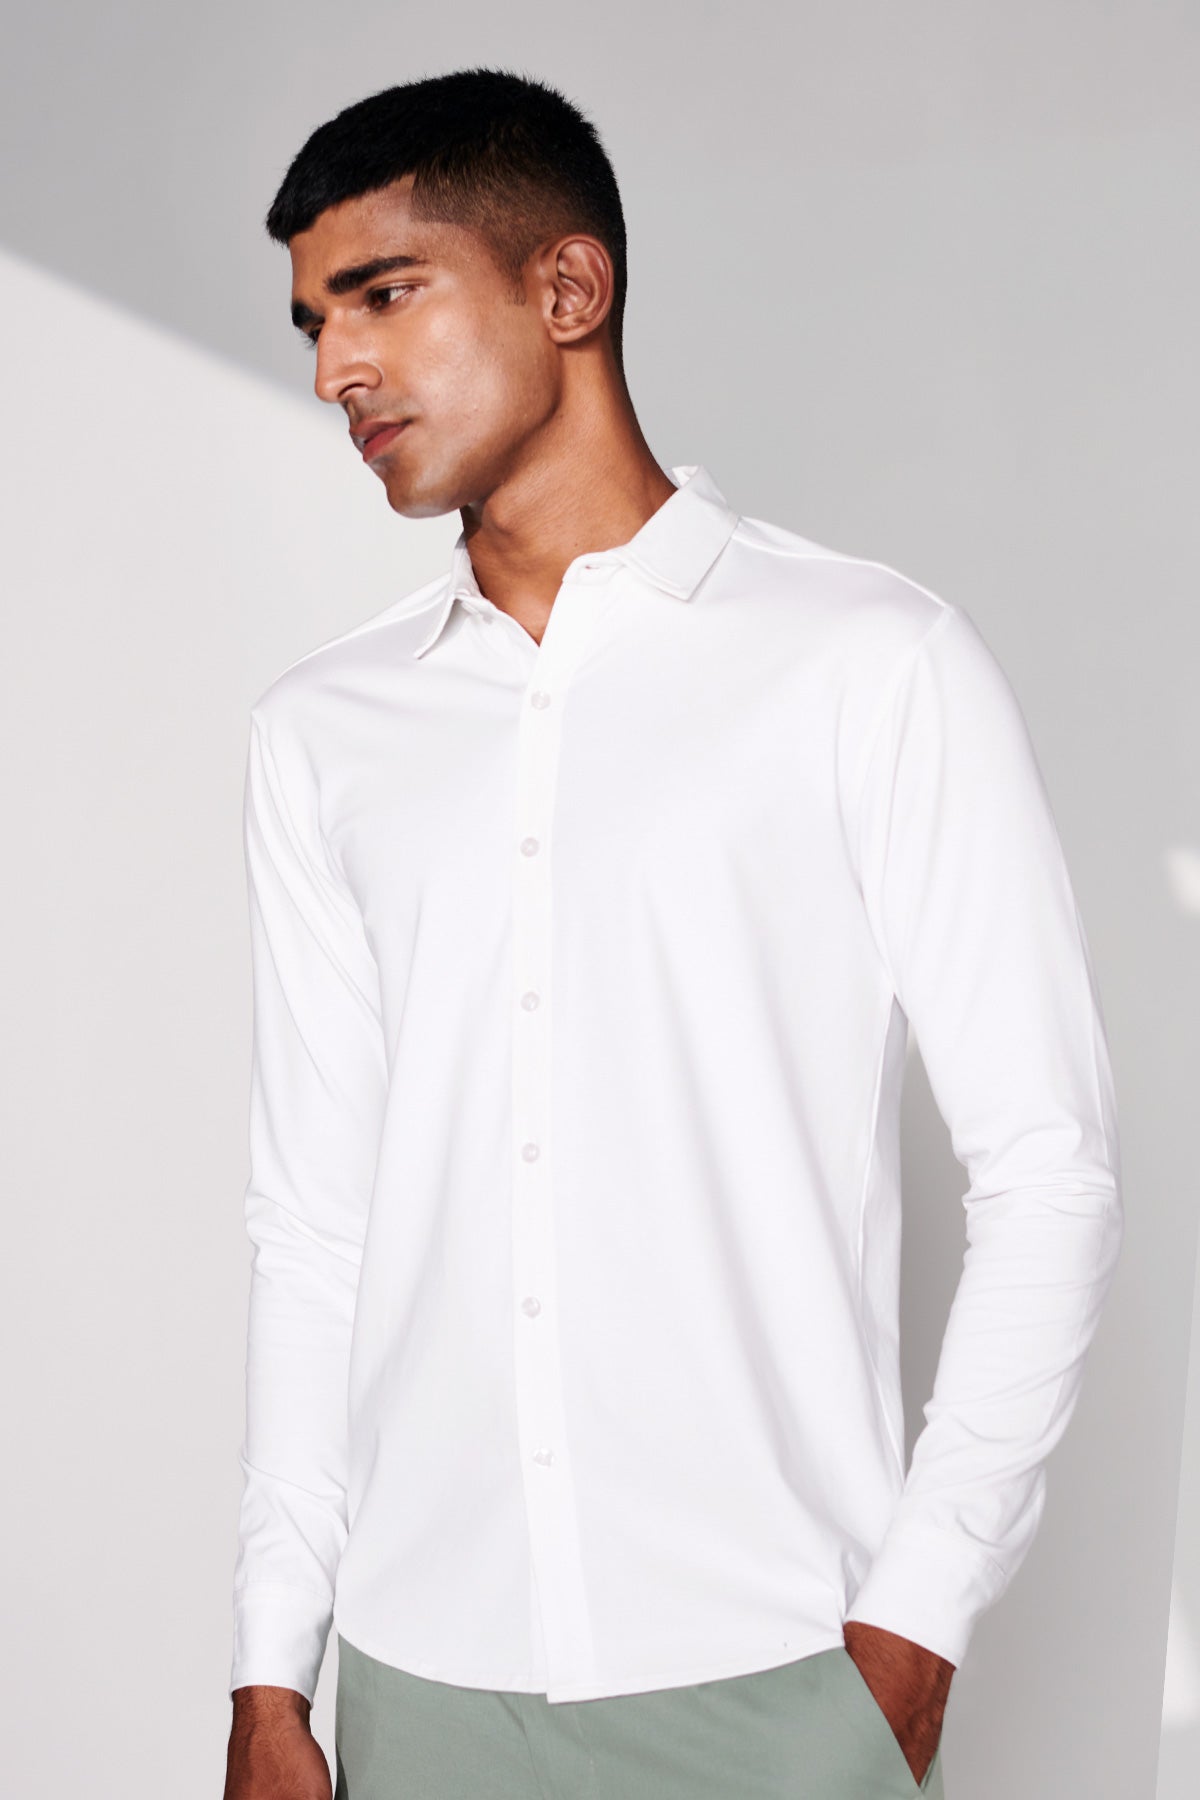 The Pure White Full Sleeve Shirt Beyours Essentials Private Limited